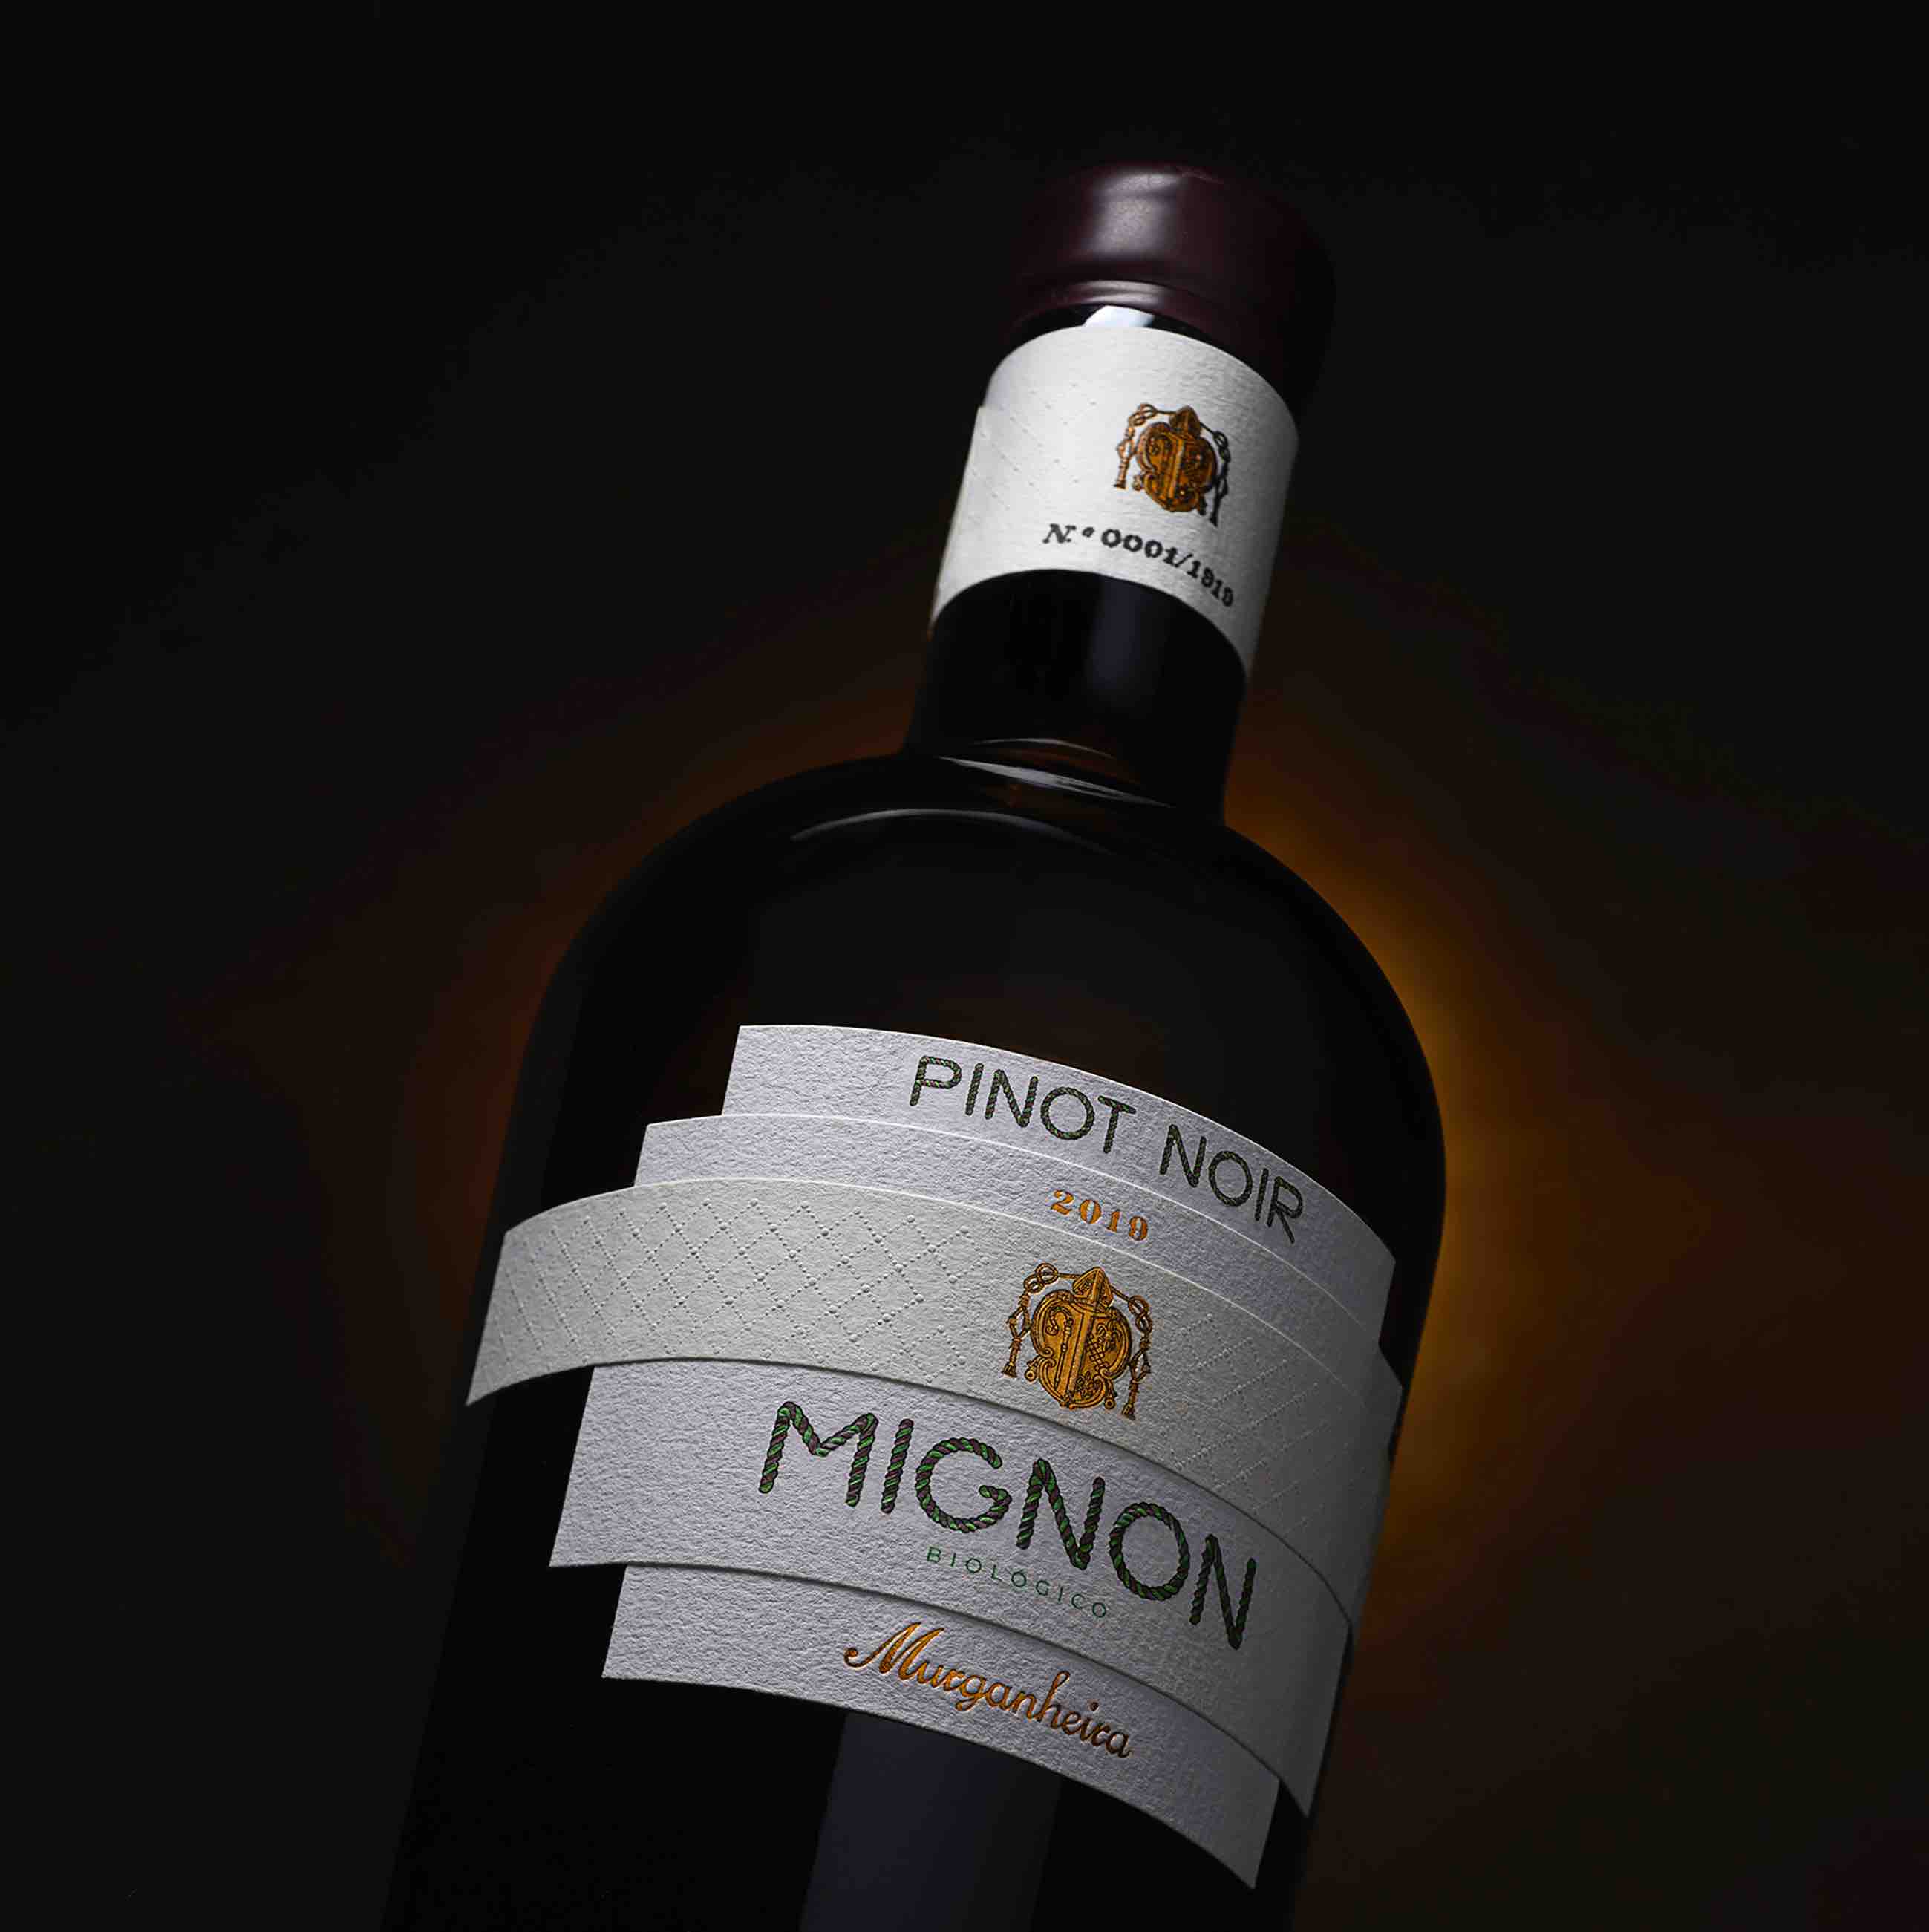 Omdesign’s Premium Packaging for Exceptional Organic Mignon Pinot Noir